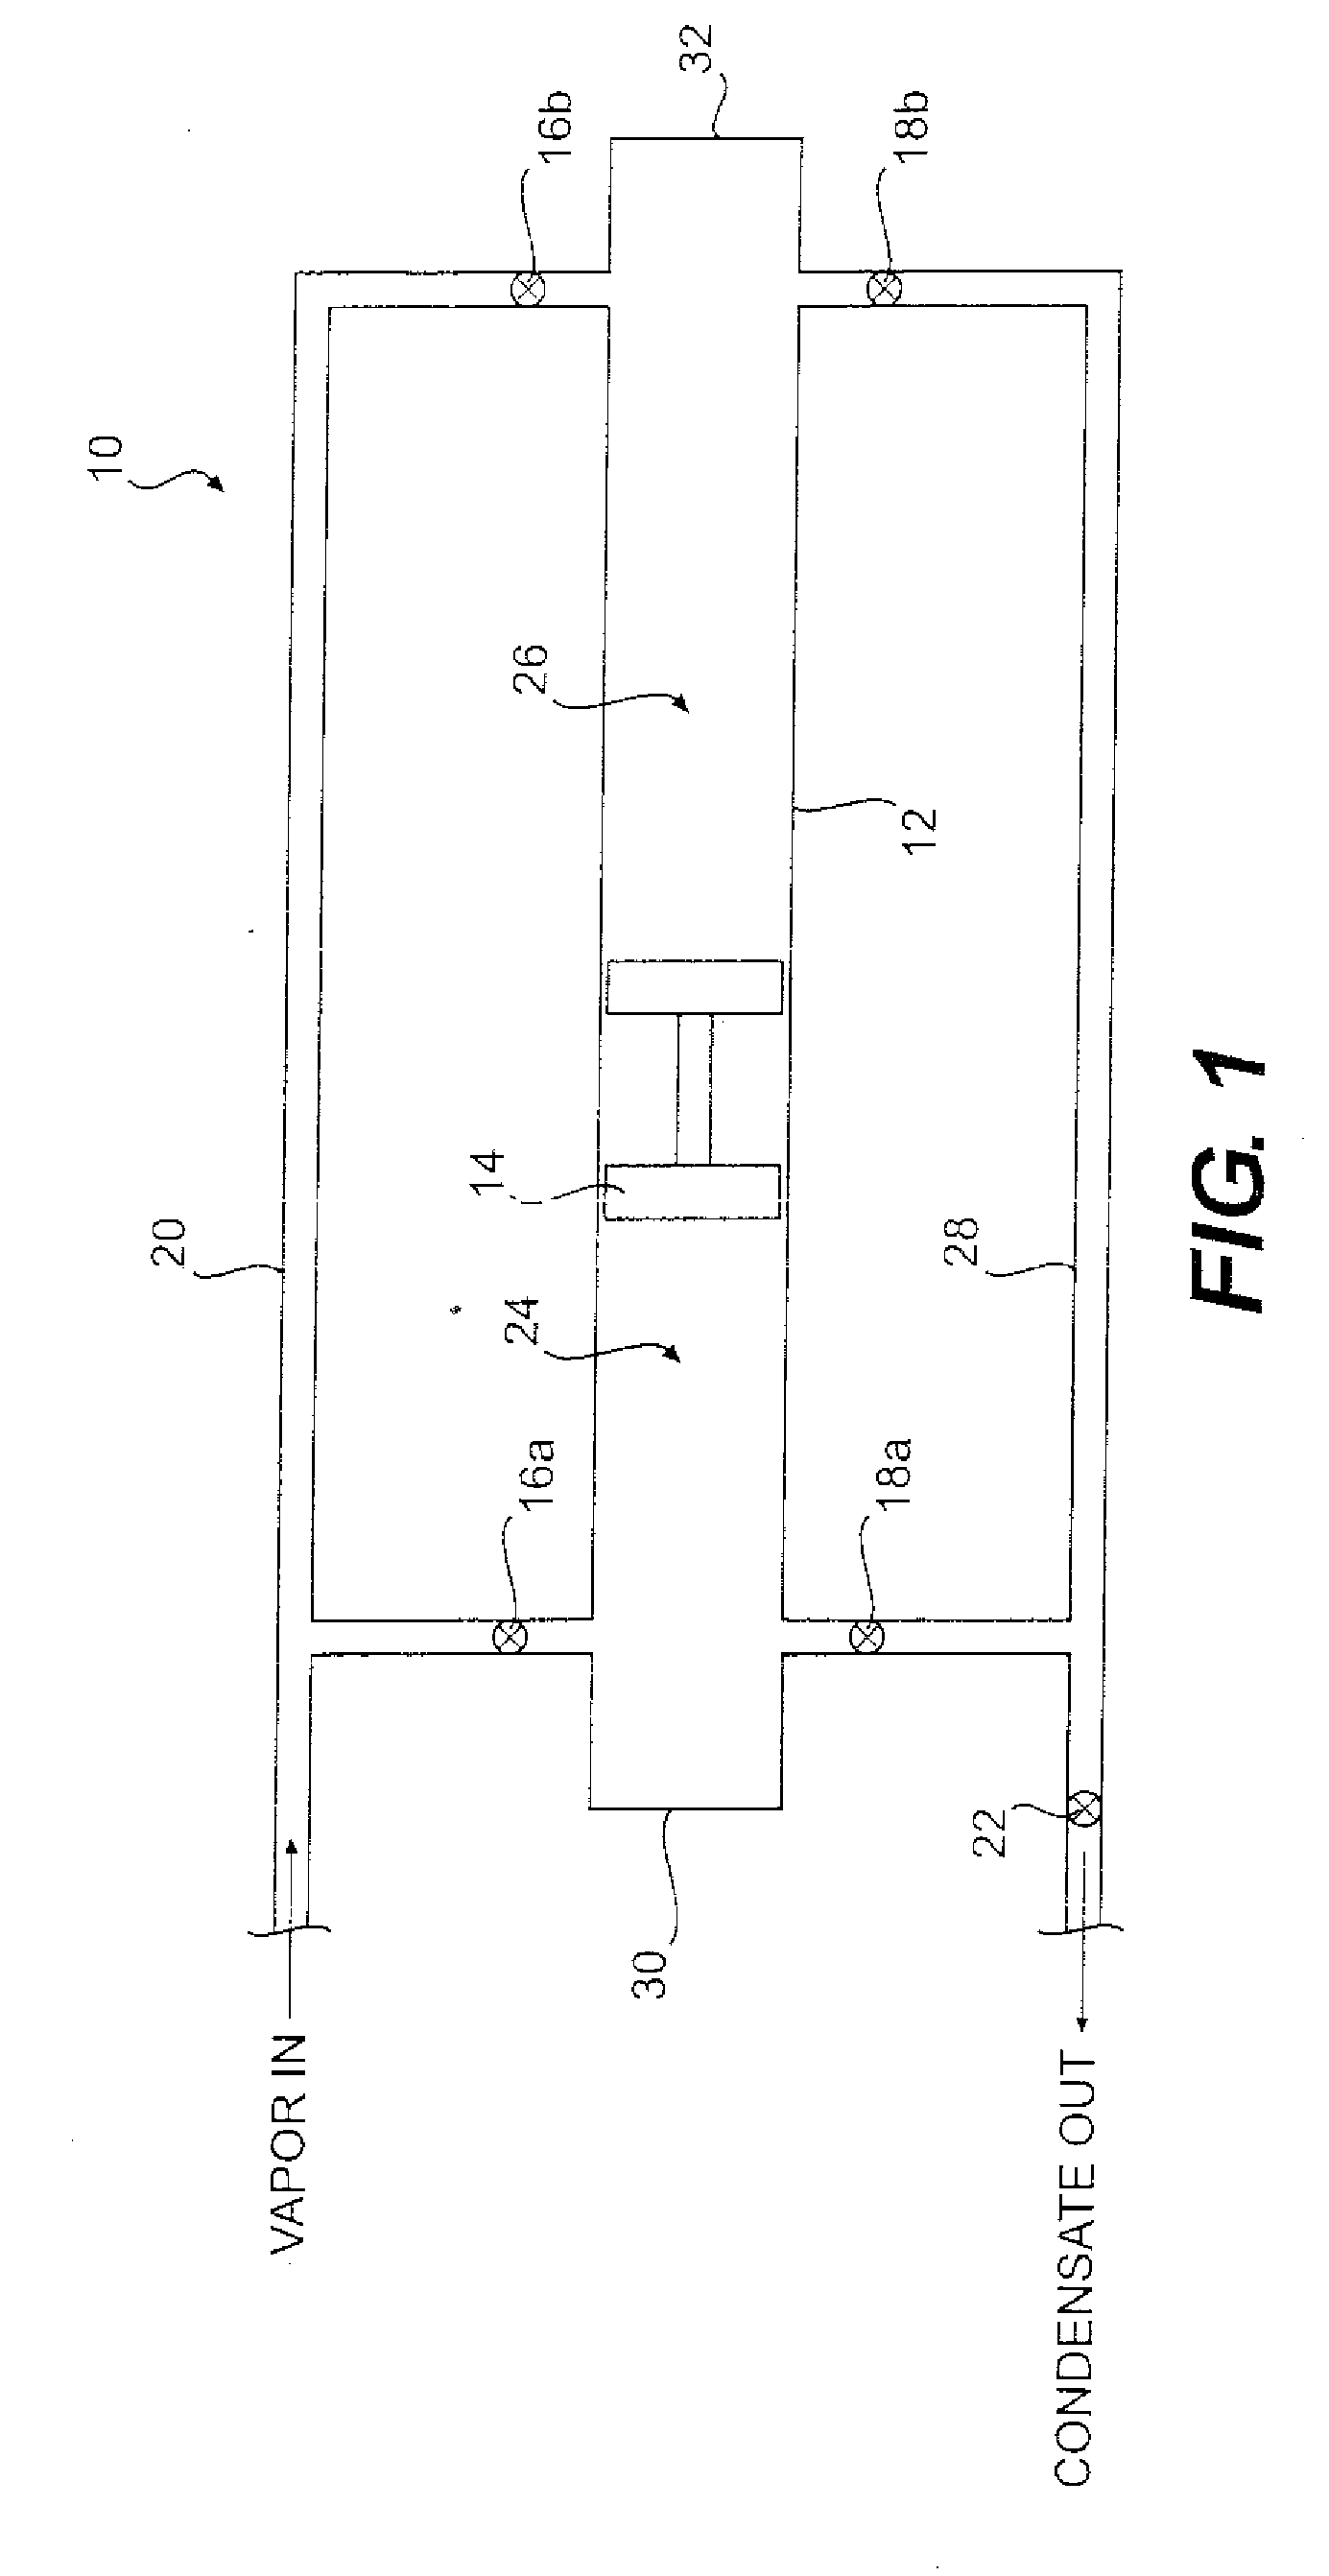 Open Loop Heat Pipe Radiator Having A Free-Piston For Wiping Condensed Working Fluid